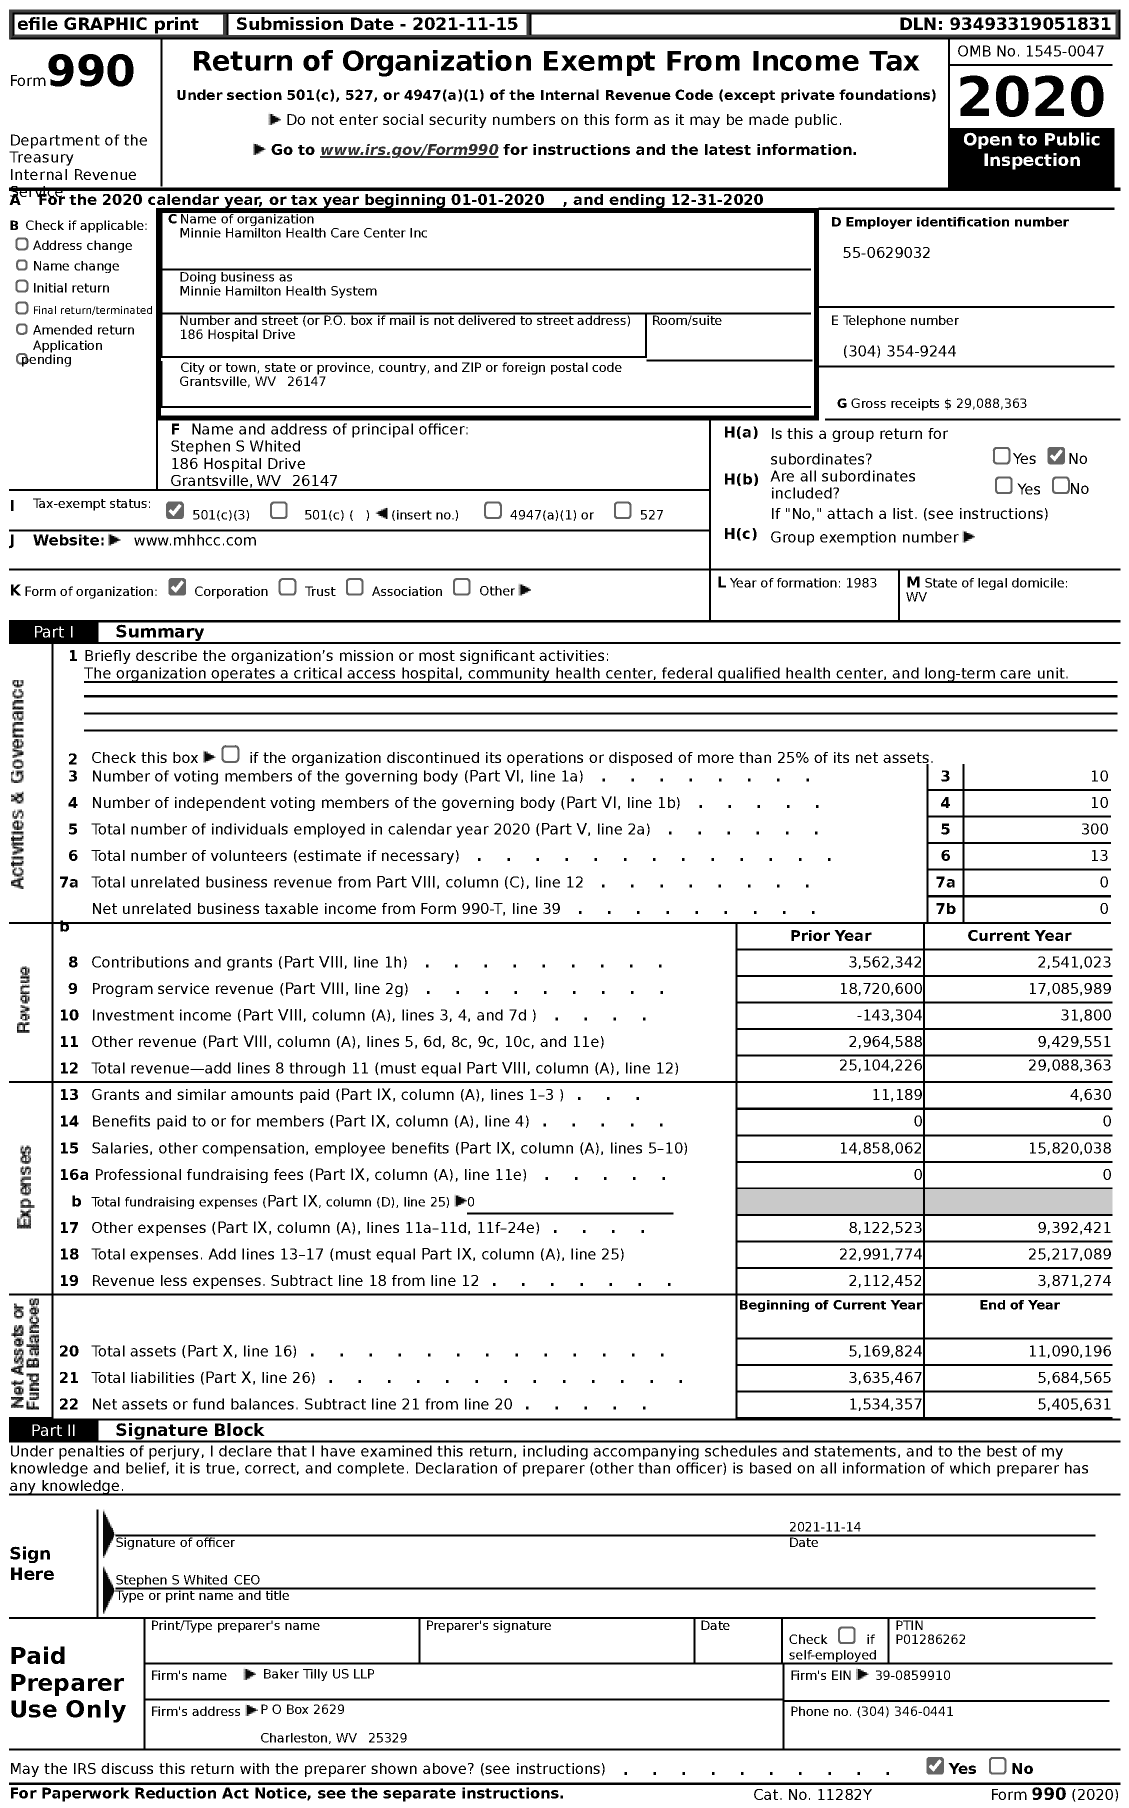 Image of first page of 2020 Form 990 for Minnie Hamilton Health System (MHHS)